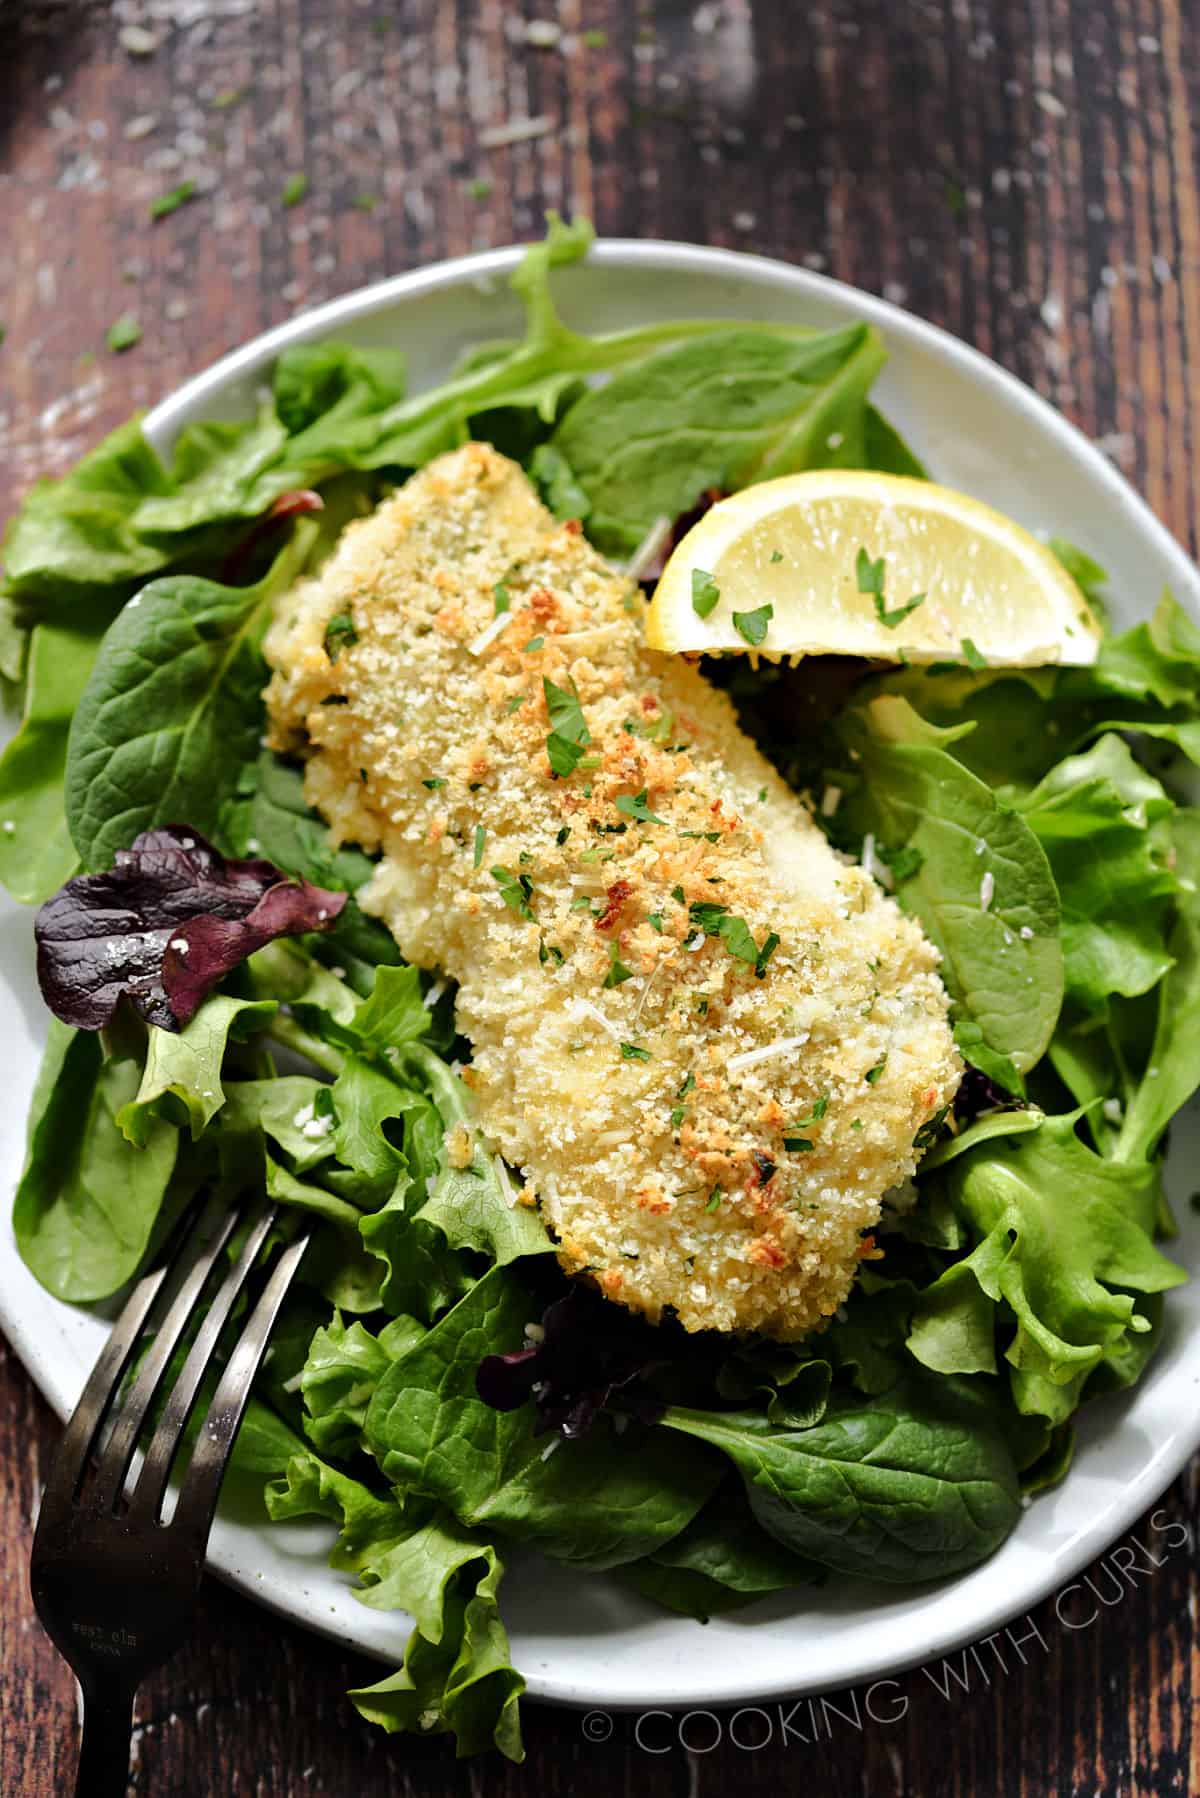 A panko crusted cod filet on a bed of leafy greens with a lemon wedge on the side.